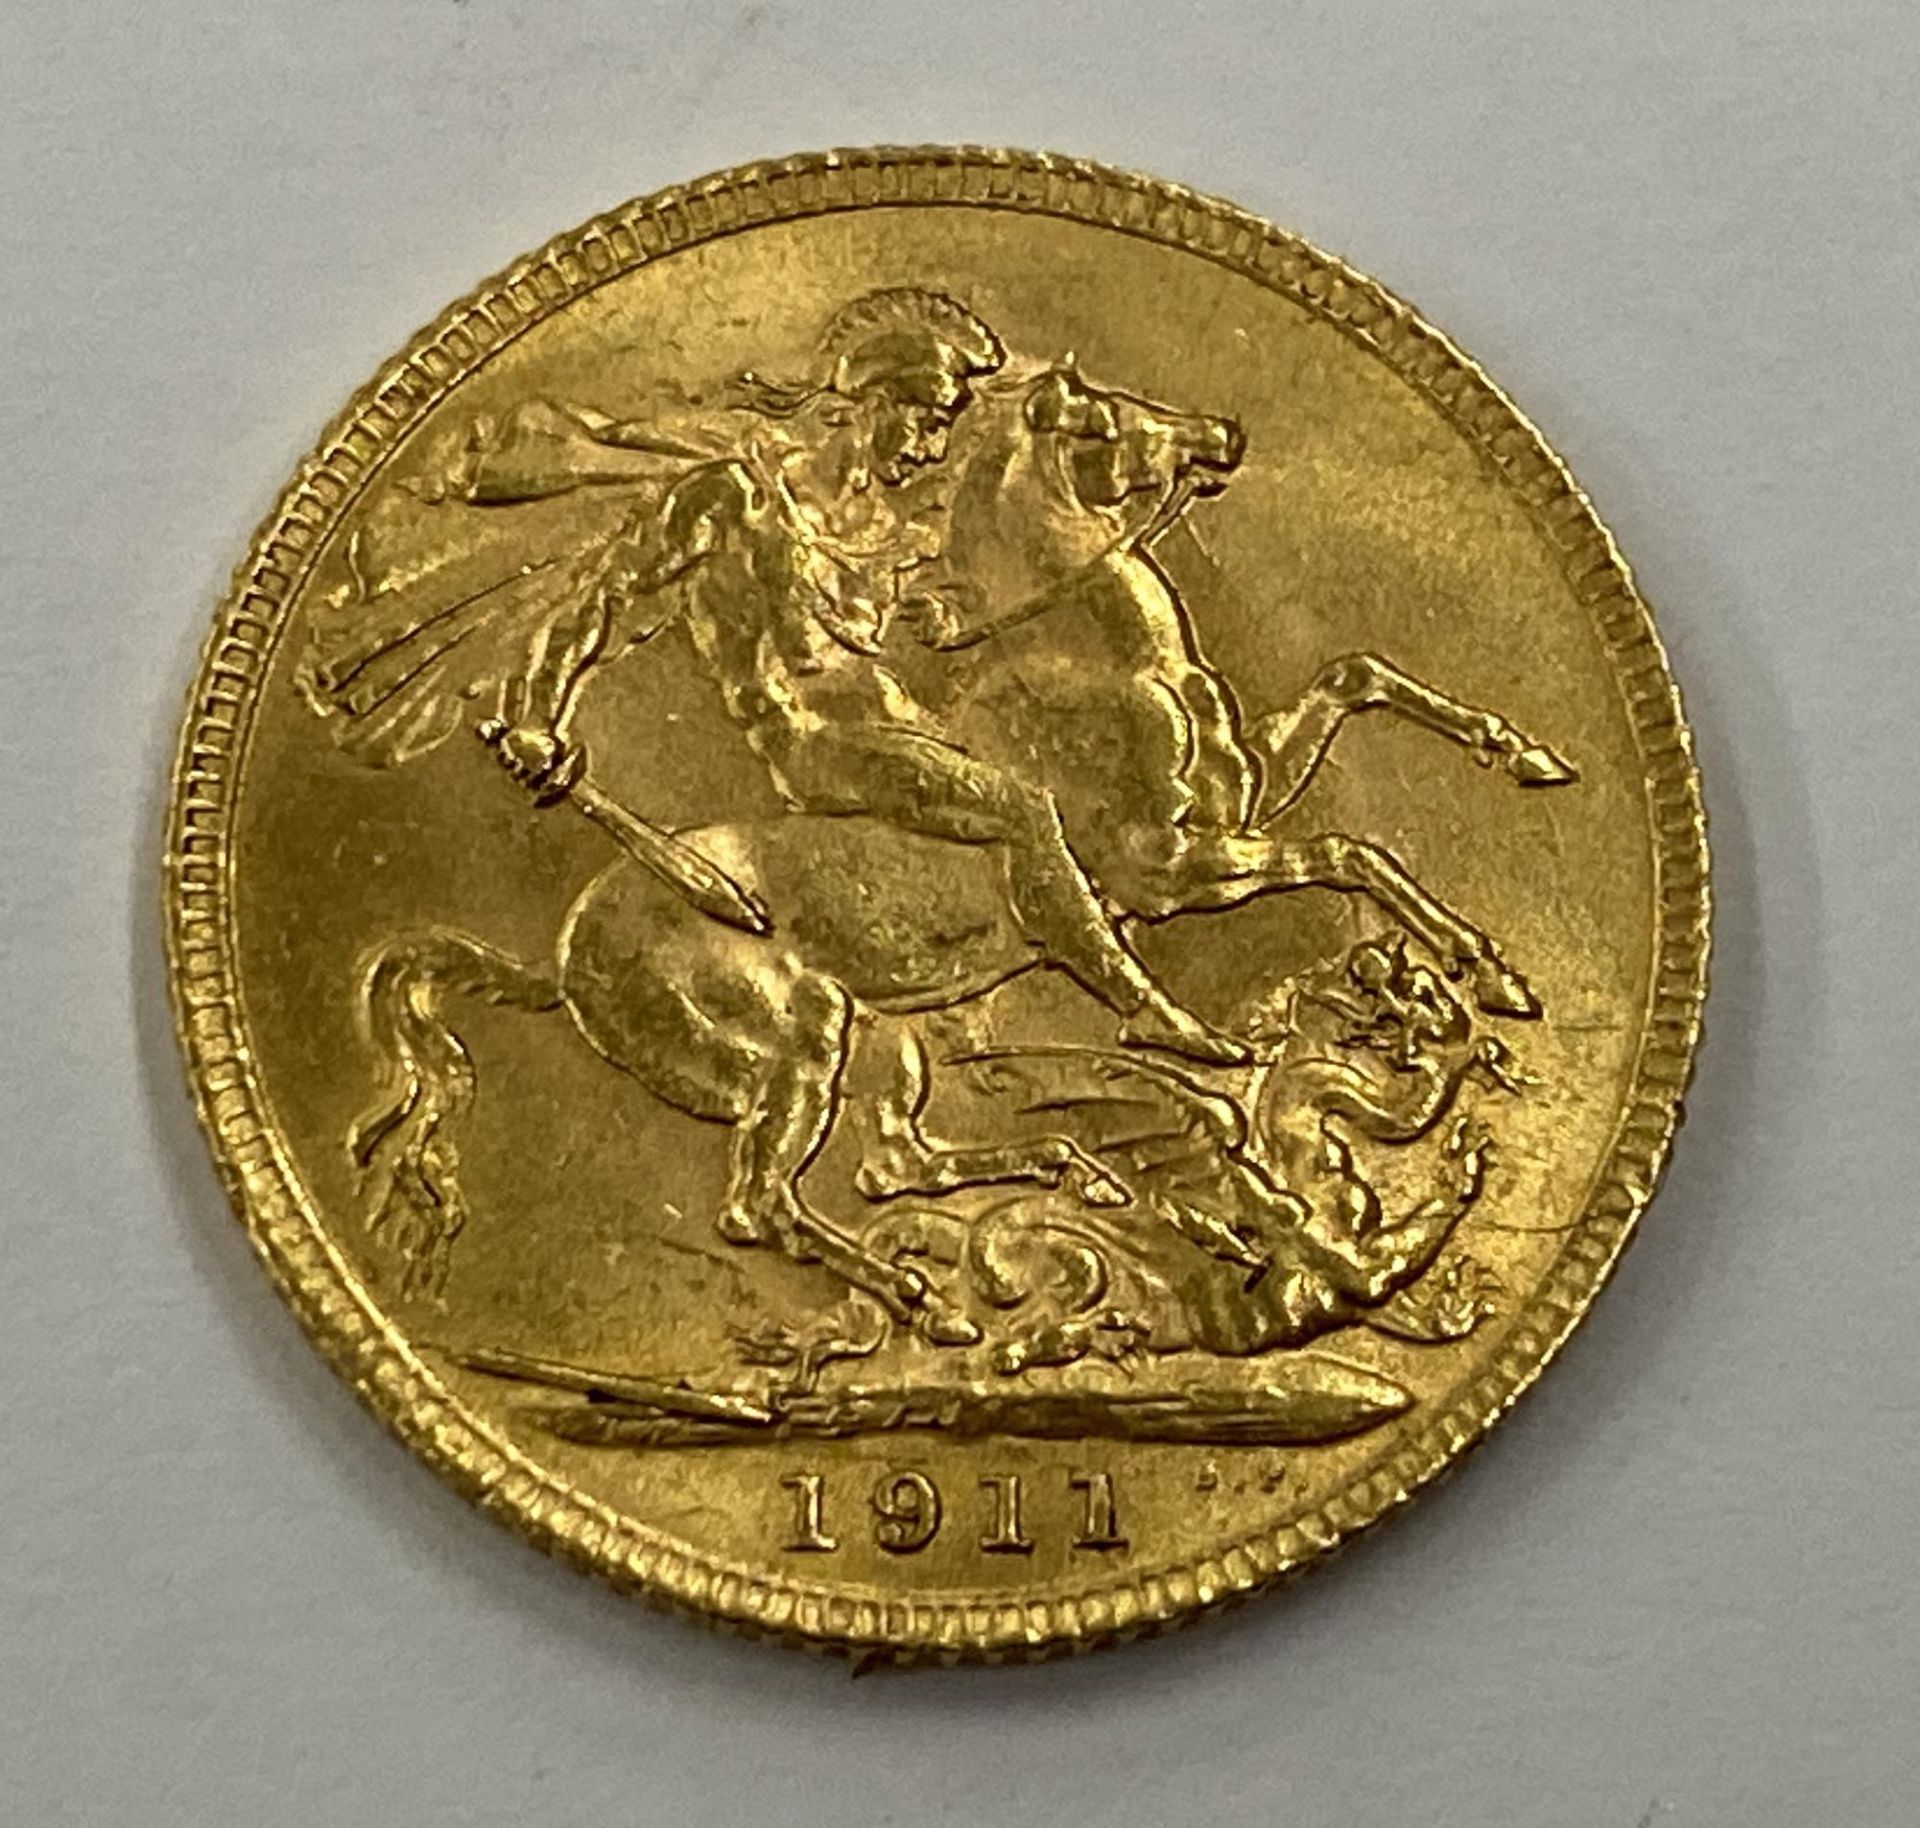 A GEORGE V 1911 GOLD FULL SOVEREIGN COIN